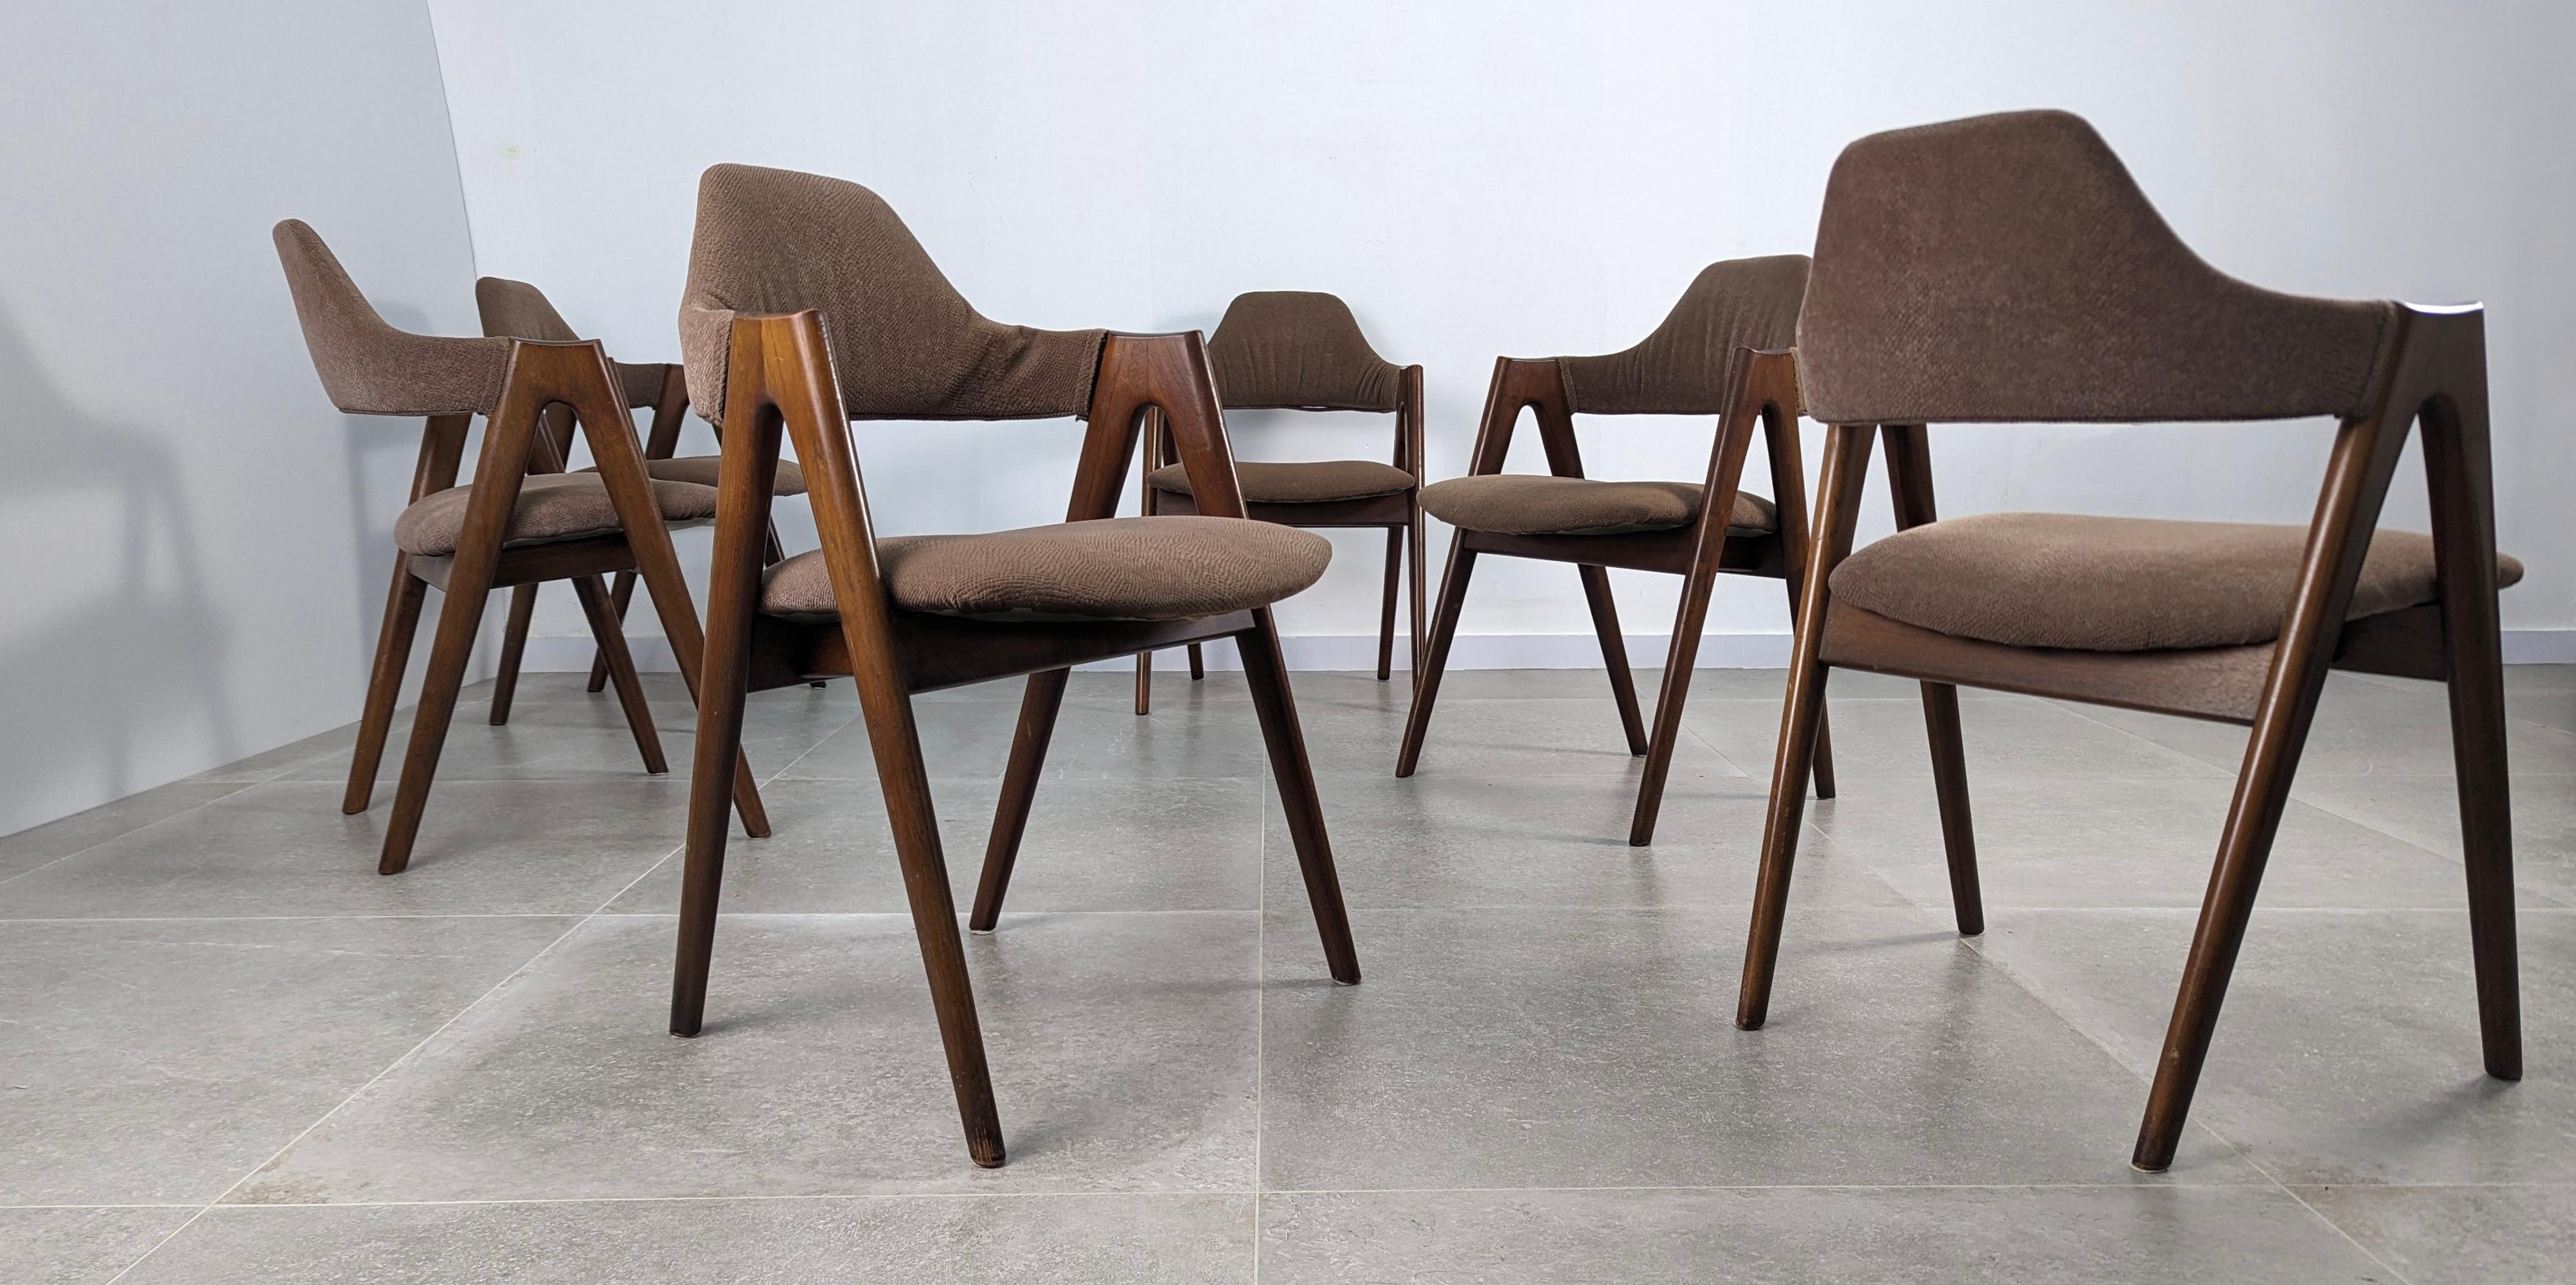 Set of Danish Compass Chairs by Kai Kristiansen, 1960s For Sale 1